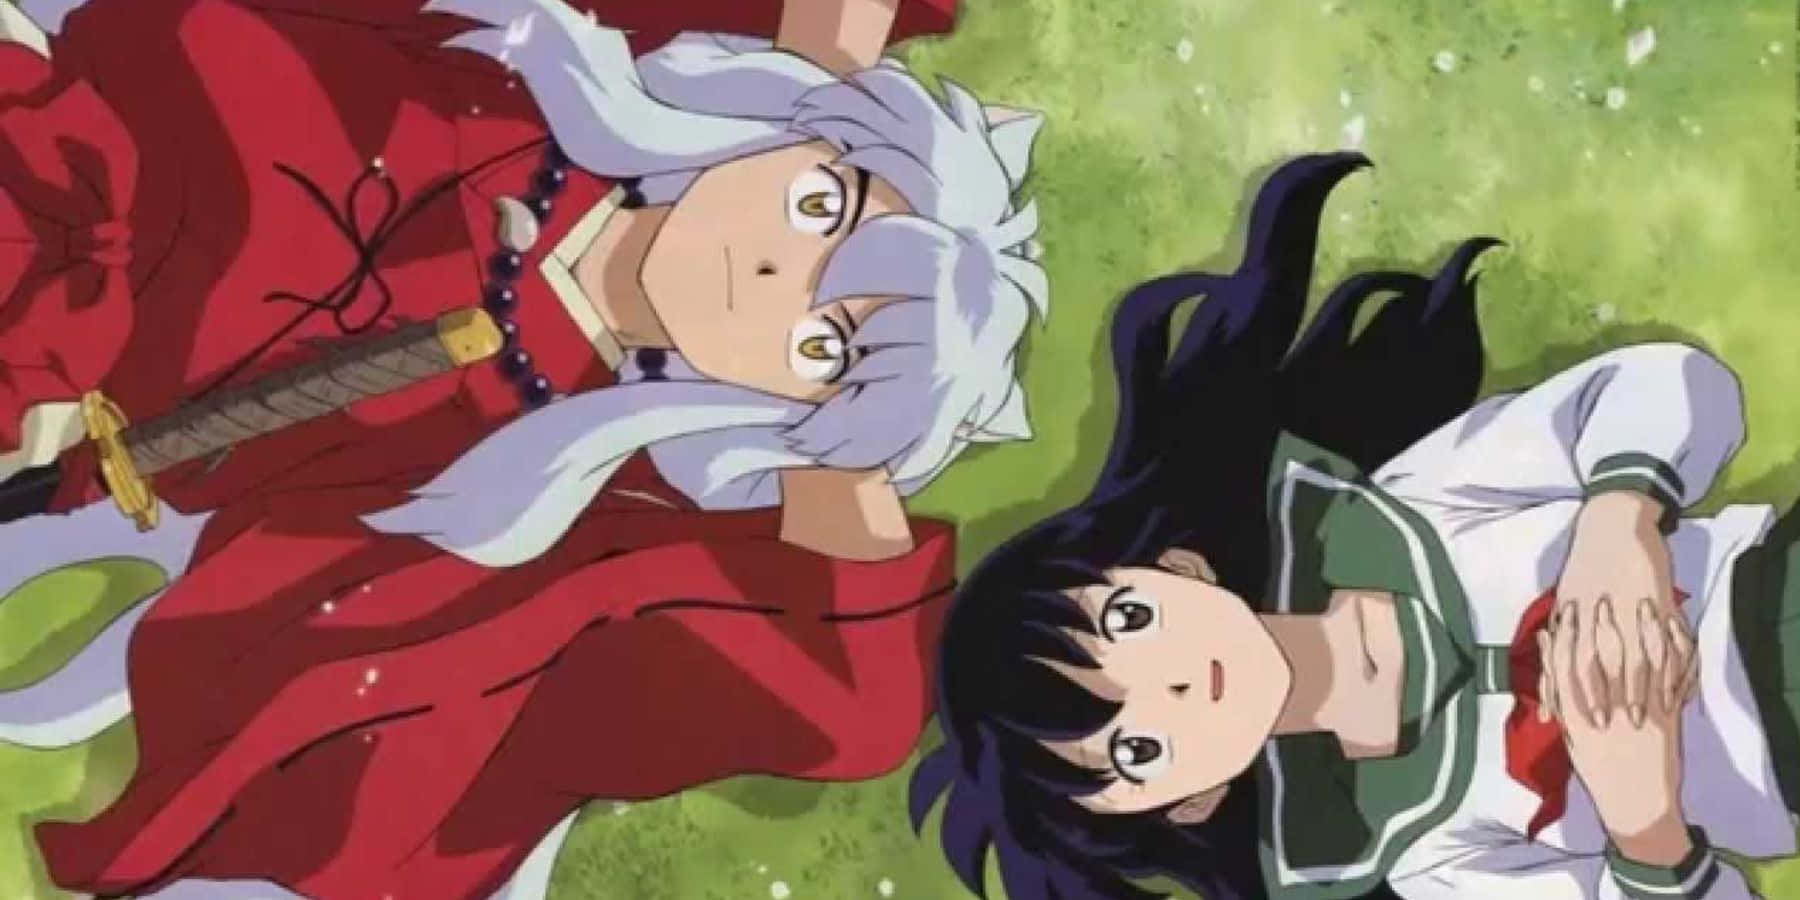 Inuyasha and Kagome - A Timeless Love Story Wallpaper